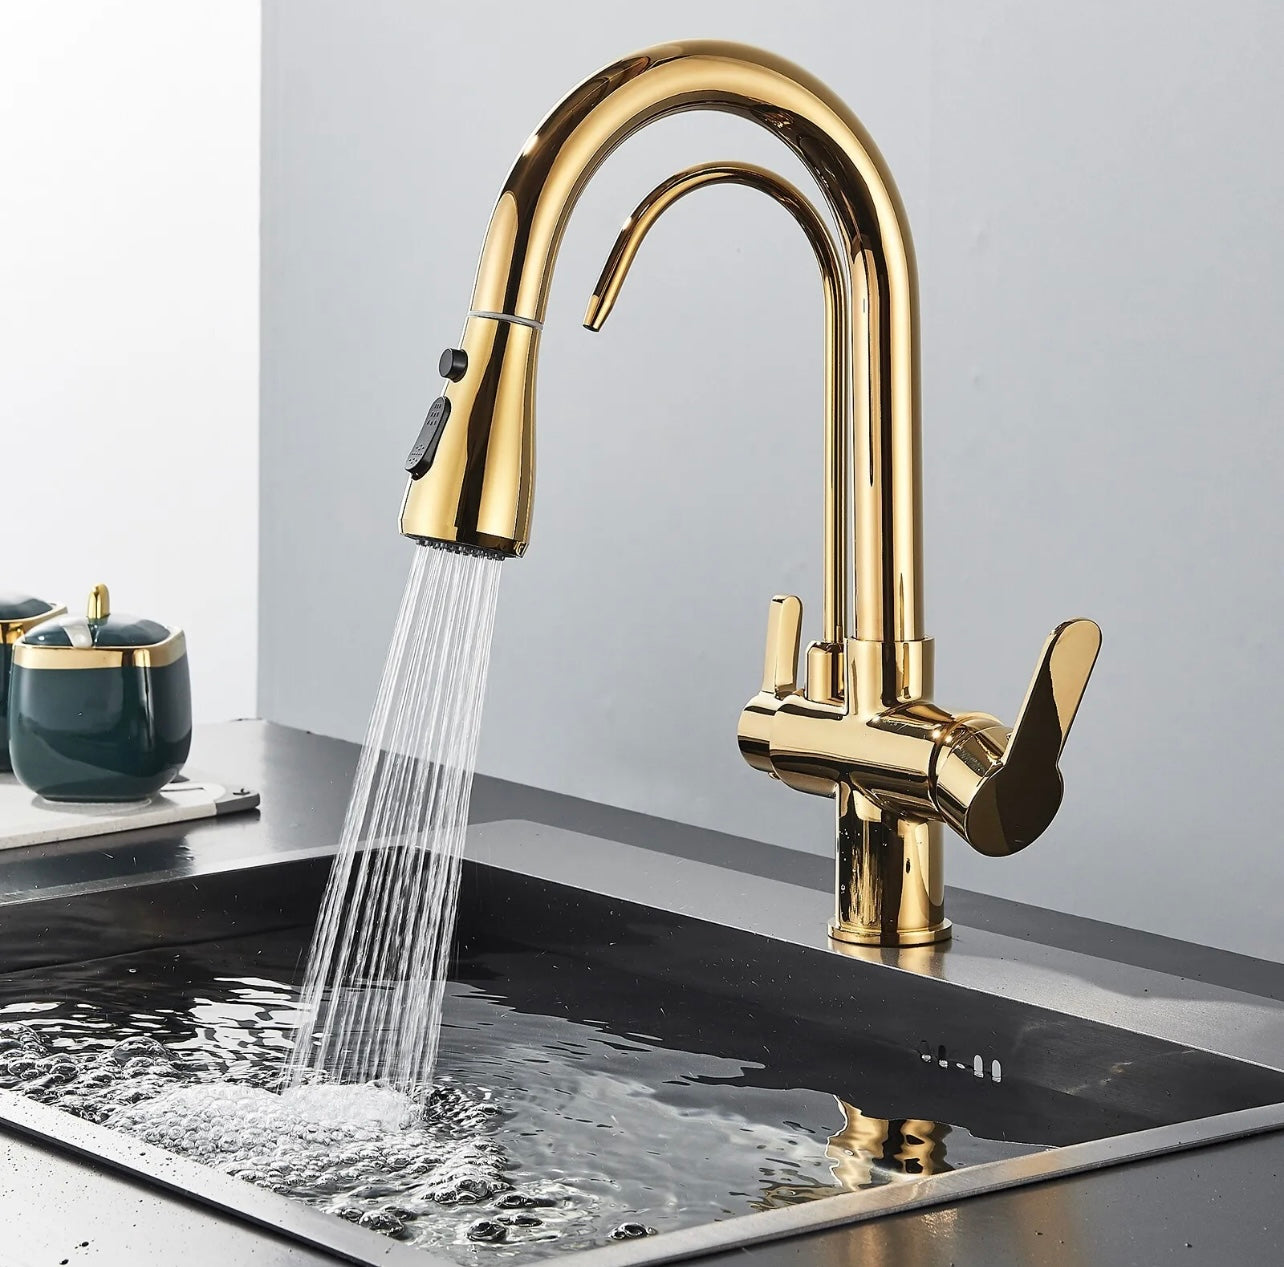 Gold Kitchen Sink Faucet Pull Down Sprayer 2 Handle 3 in 1 Water Filter Faucets